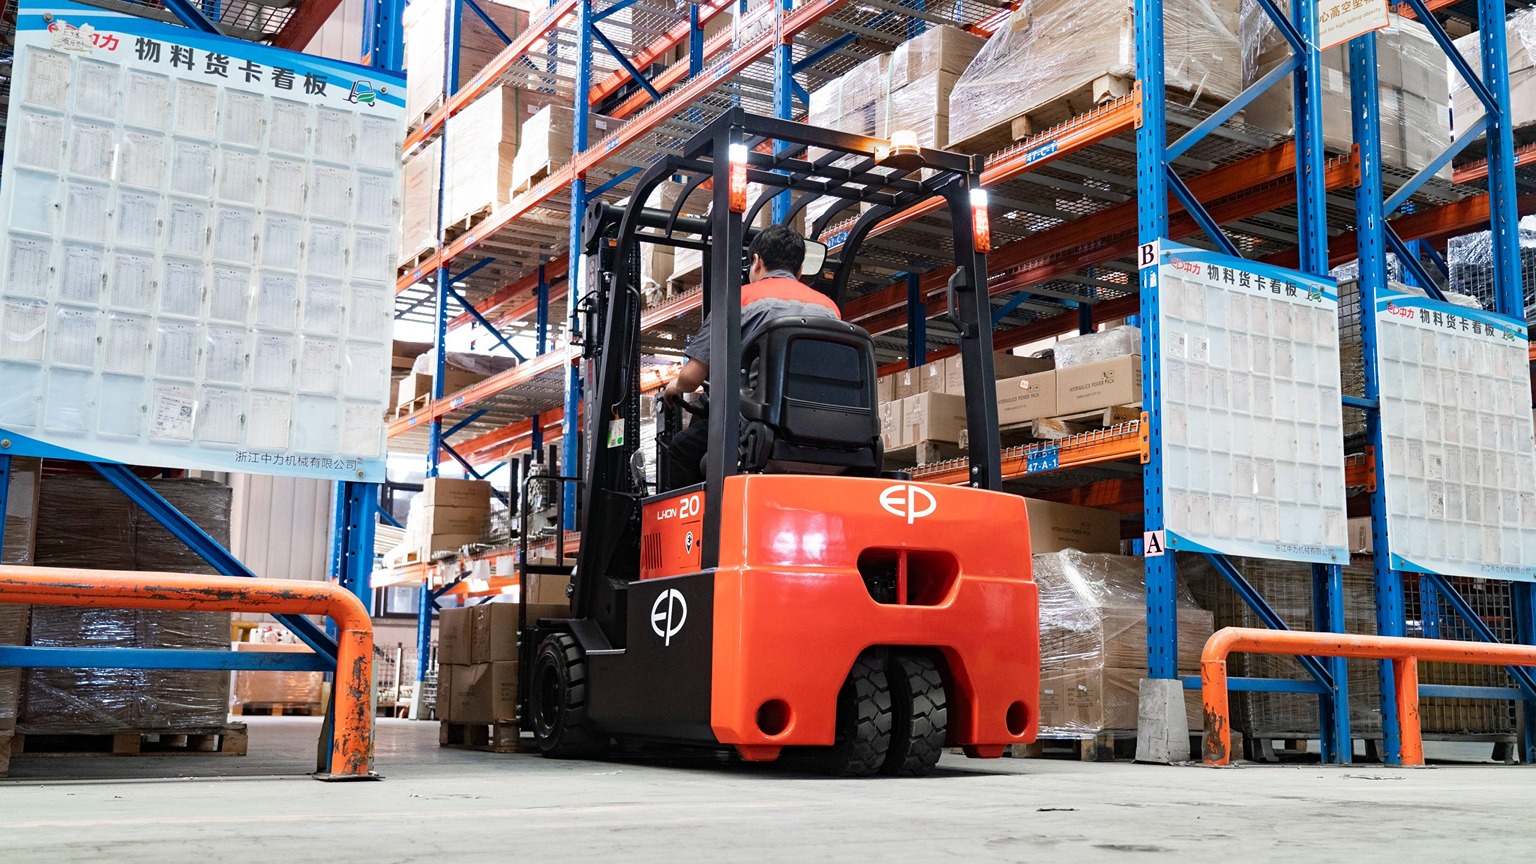 TVL forklift truck being used in a warehouse.